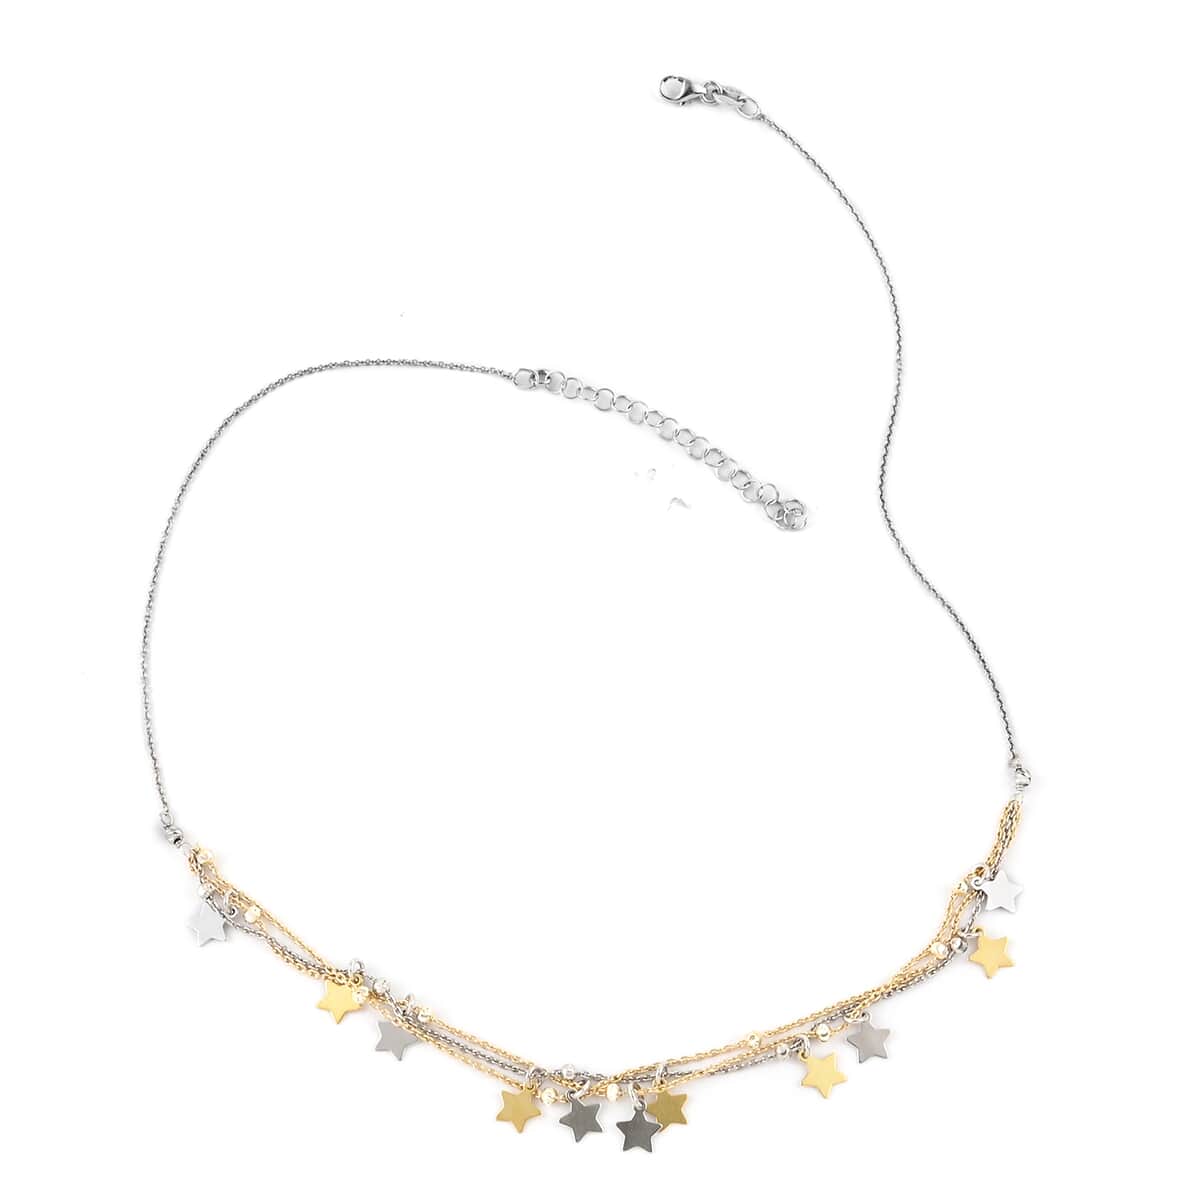 Silver and Gold Celestial Star and Moon Charms and Diamond Cut Beads Draped Layered Necklace (16 Inches) in 14K YG Over and Sterling Silver 4.50 Grams image number 1